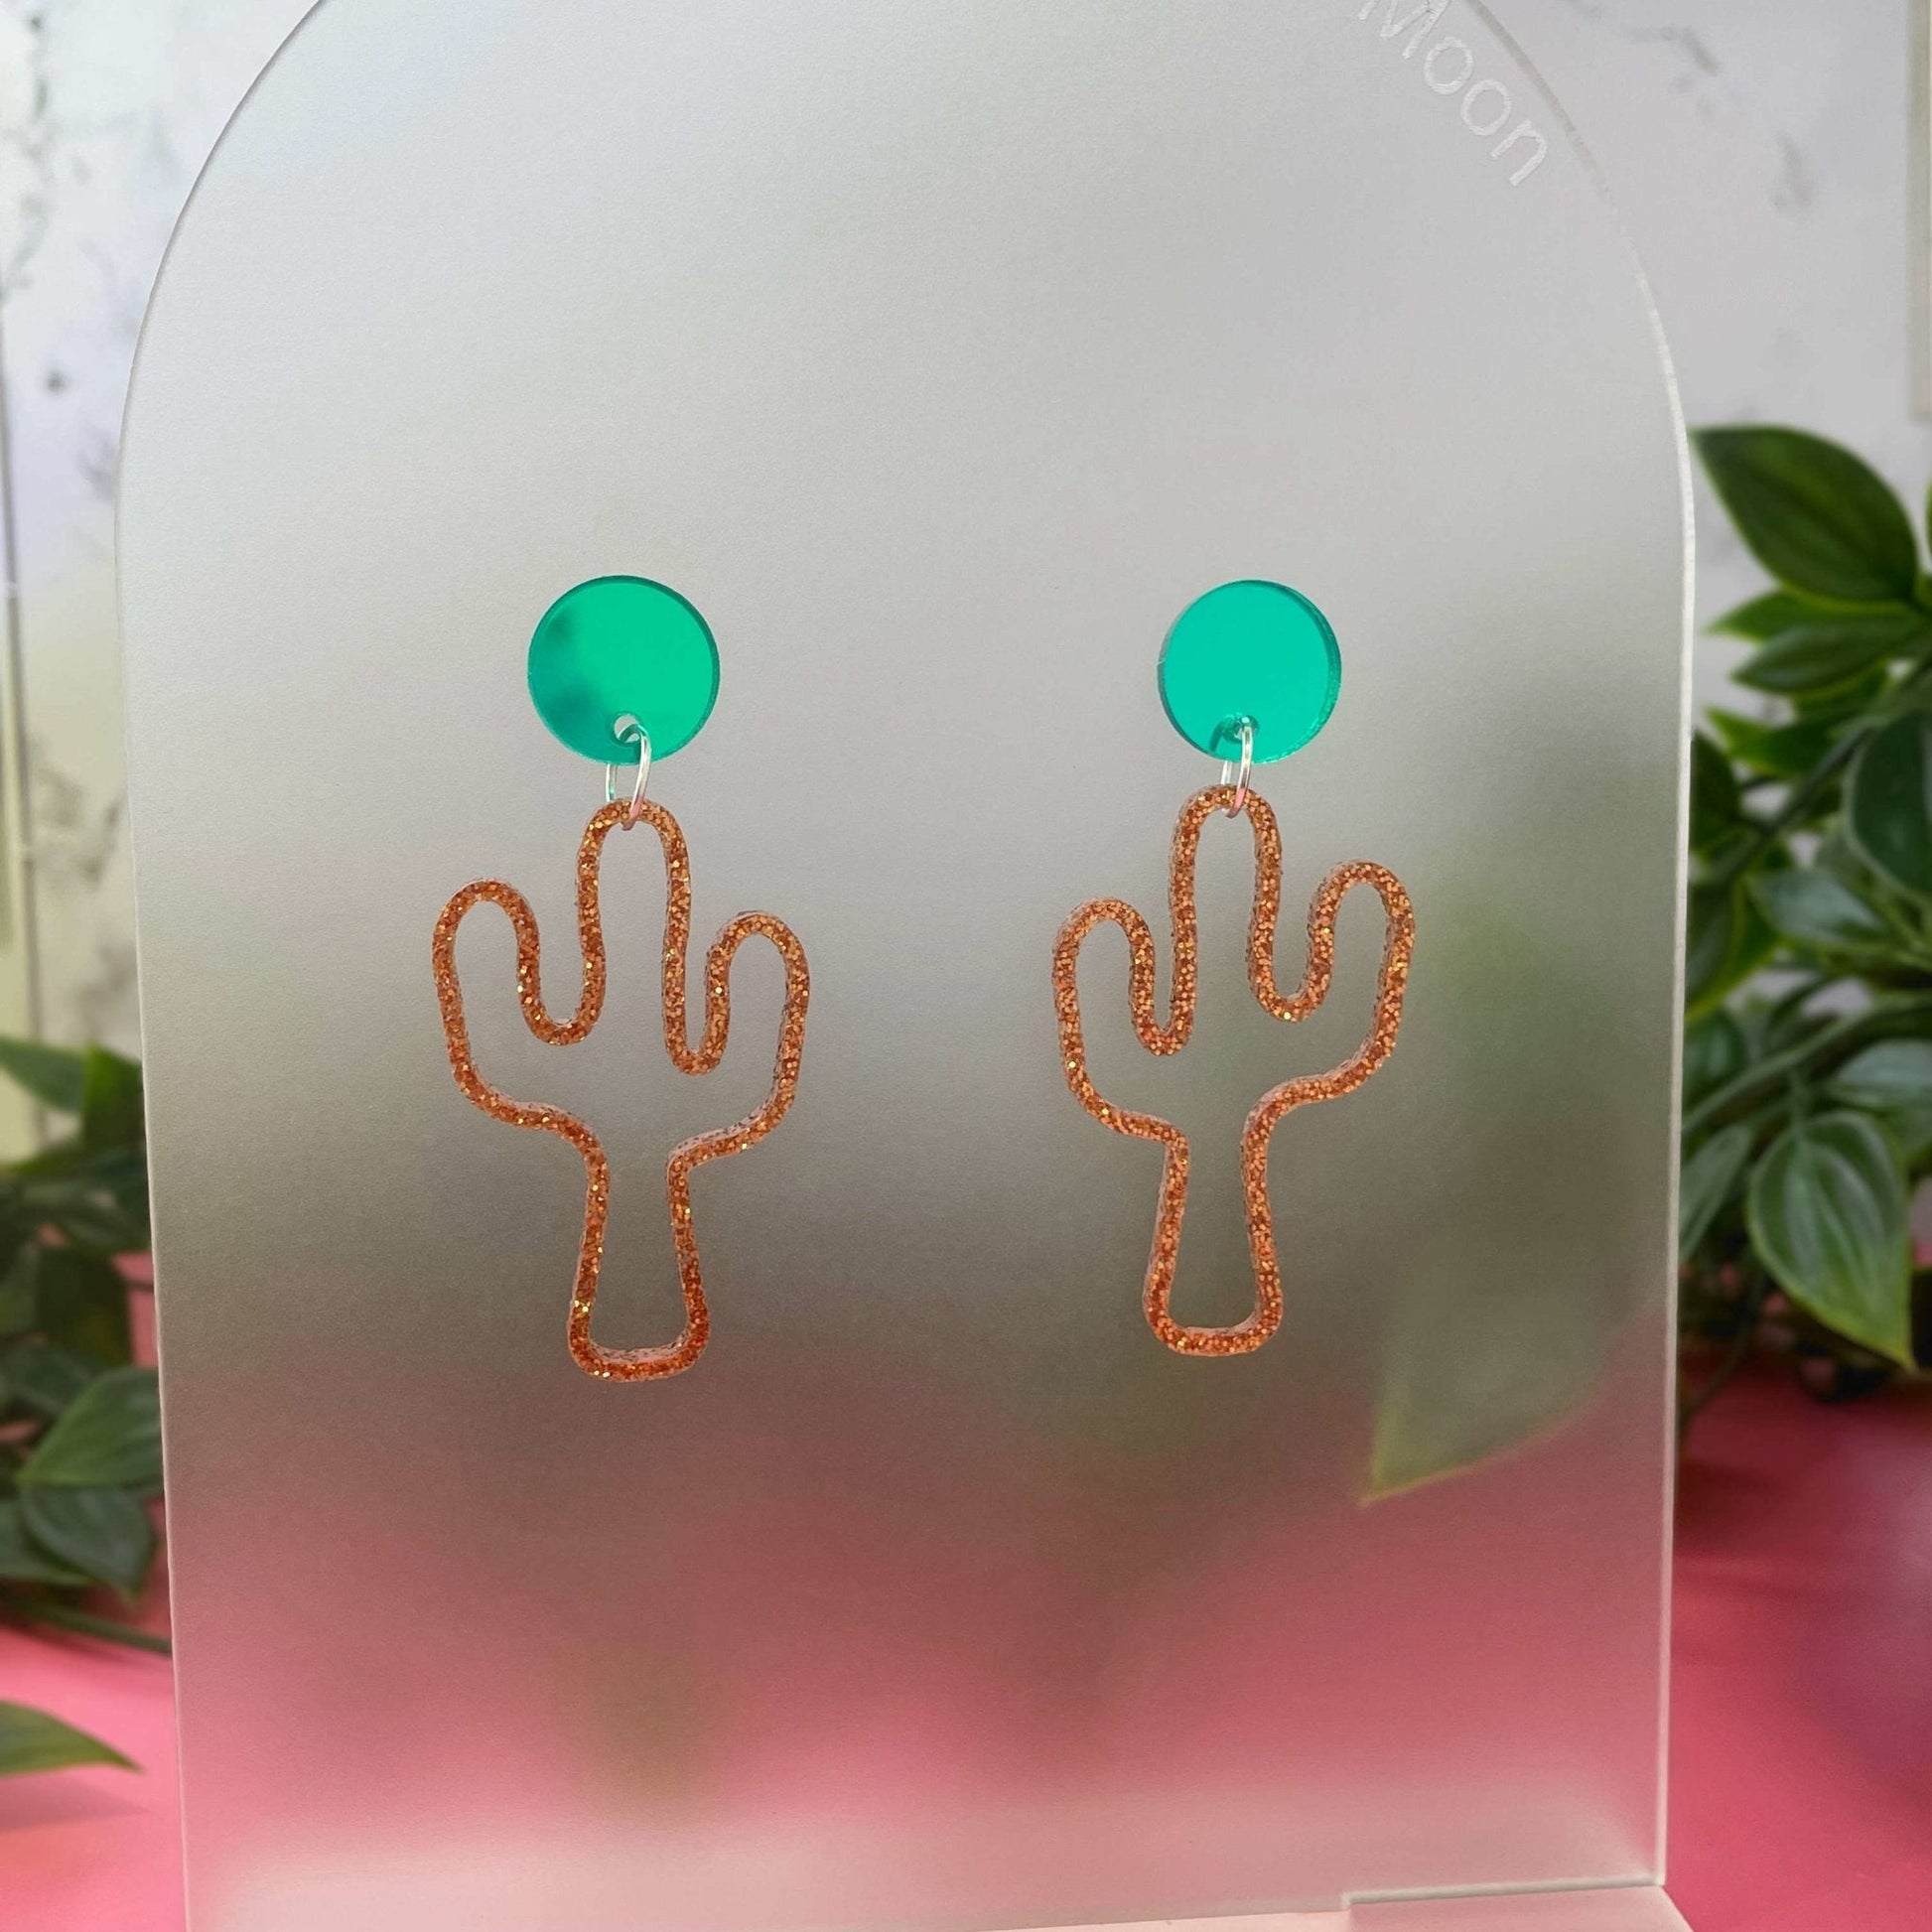 Rose Gold Glitter Cactus Earrings - Lost Minds Clothing